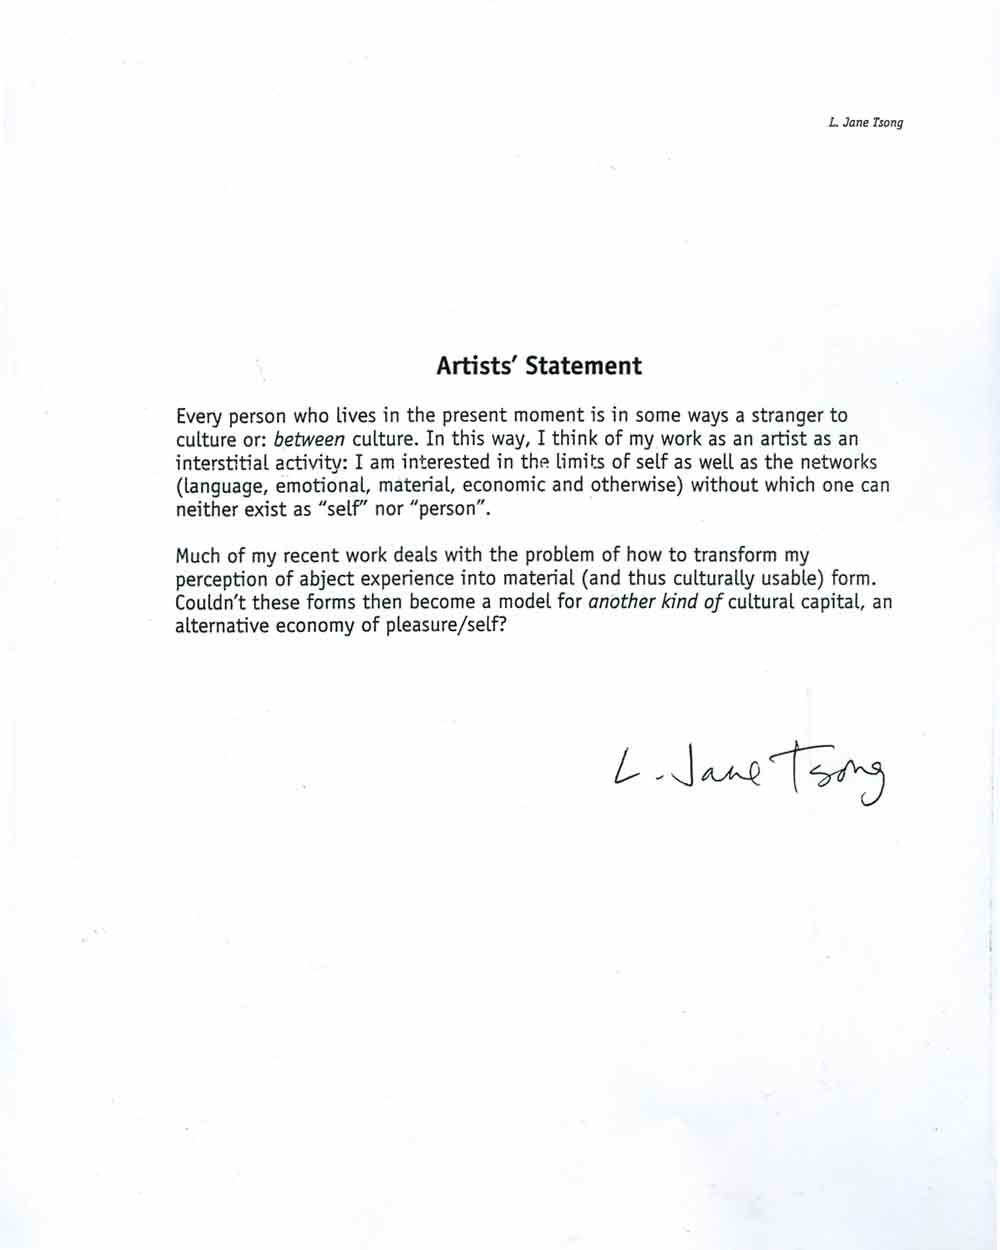 Lily Tsong's Artist Statement, signed as L. Jane Tsong